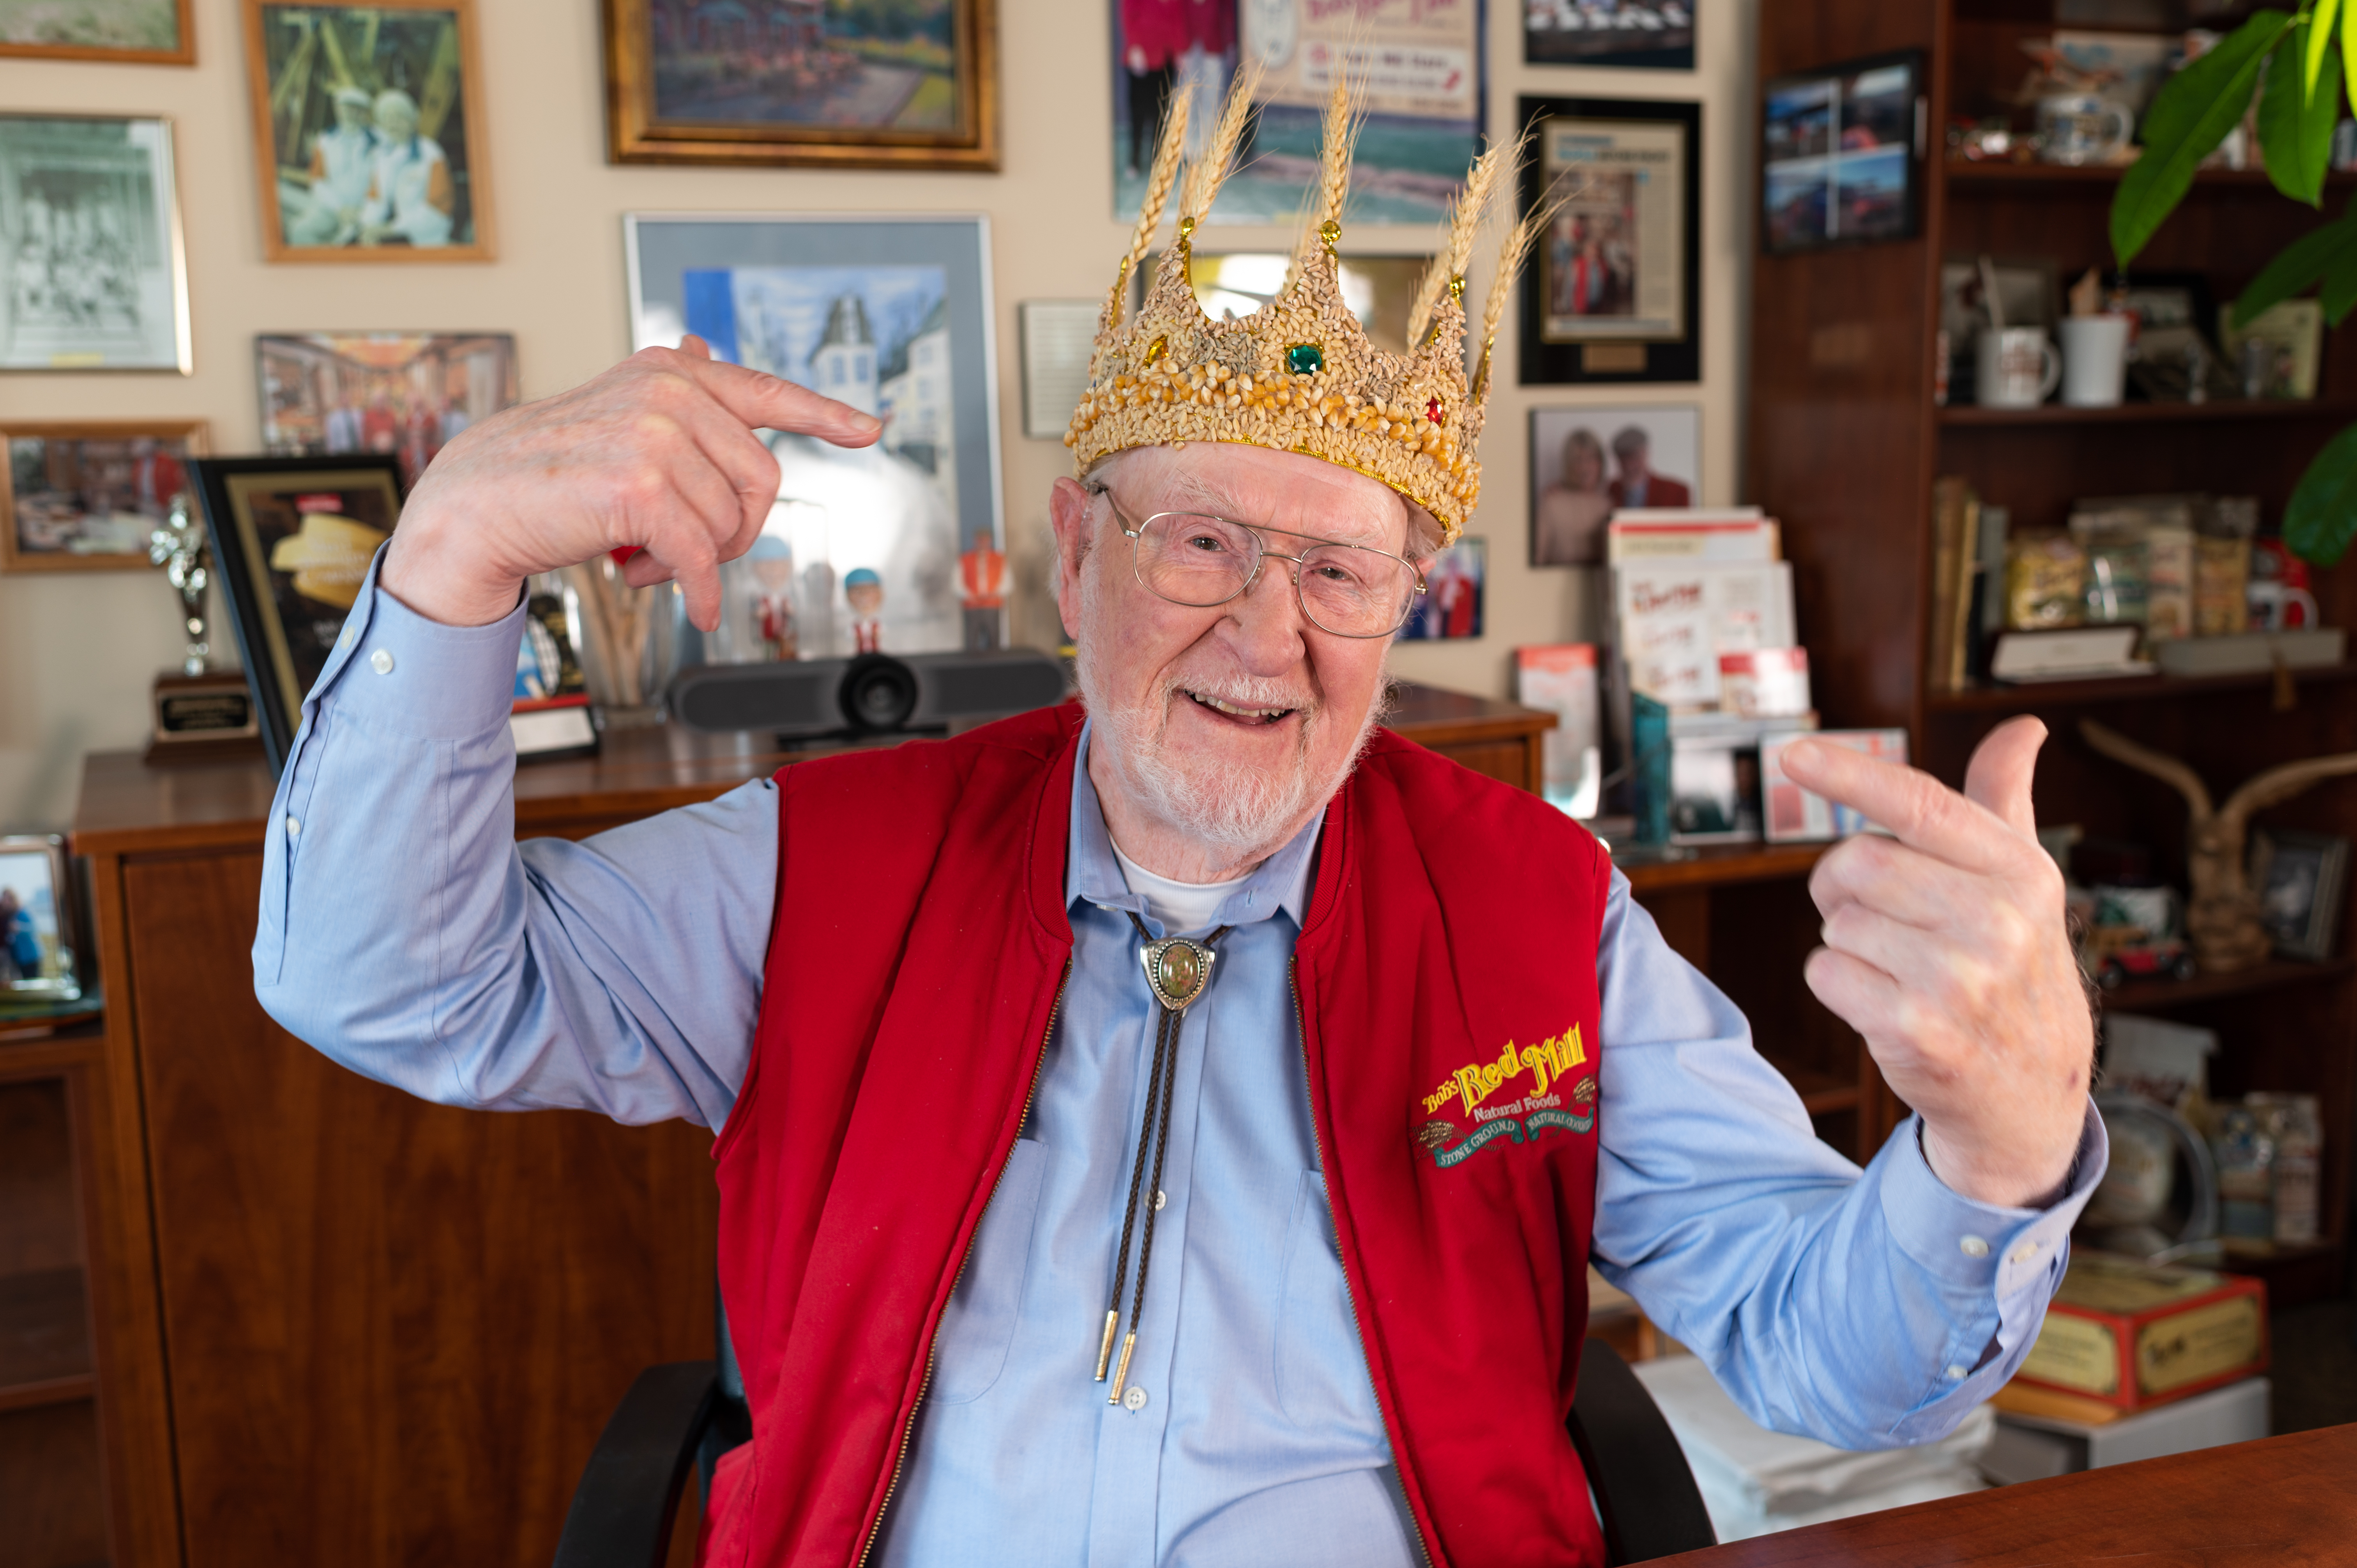 Bob Moore wearing the Whole Grain Crown, a large crown covered in grains of corn, wheat, etc. He is gesturing excitedly at the crown.